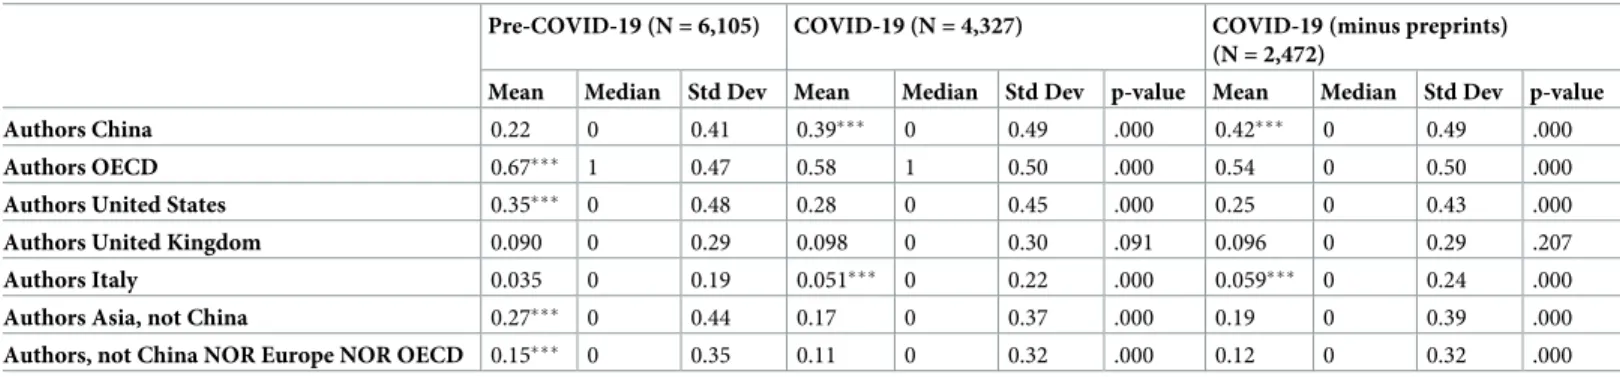 Table 3 provides a comparison of the quantity of articles produced by China and the United States in the pre- and COVID-19 periods available at the time of writing